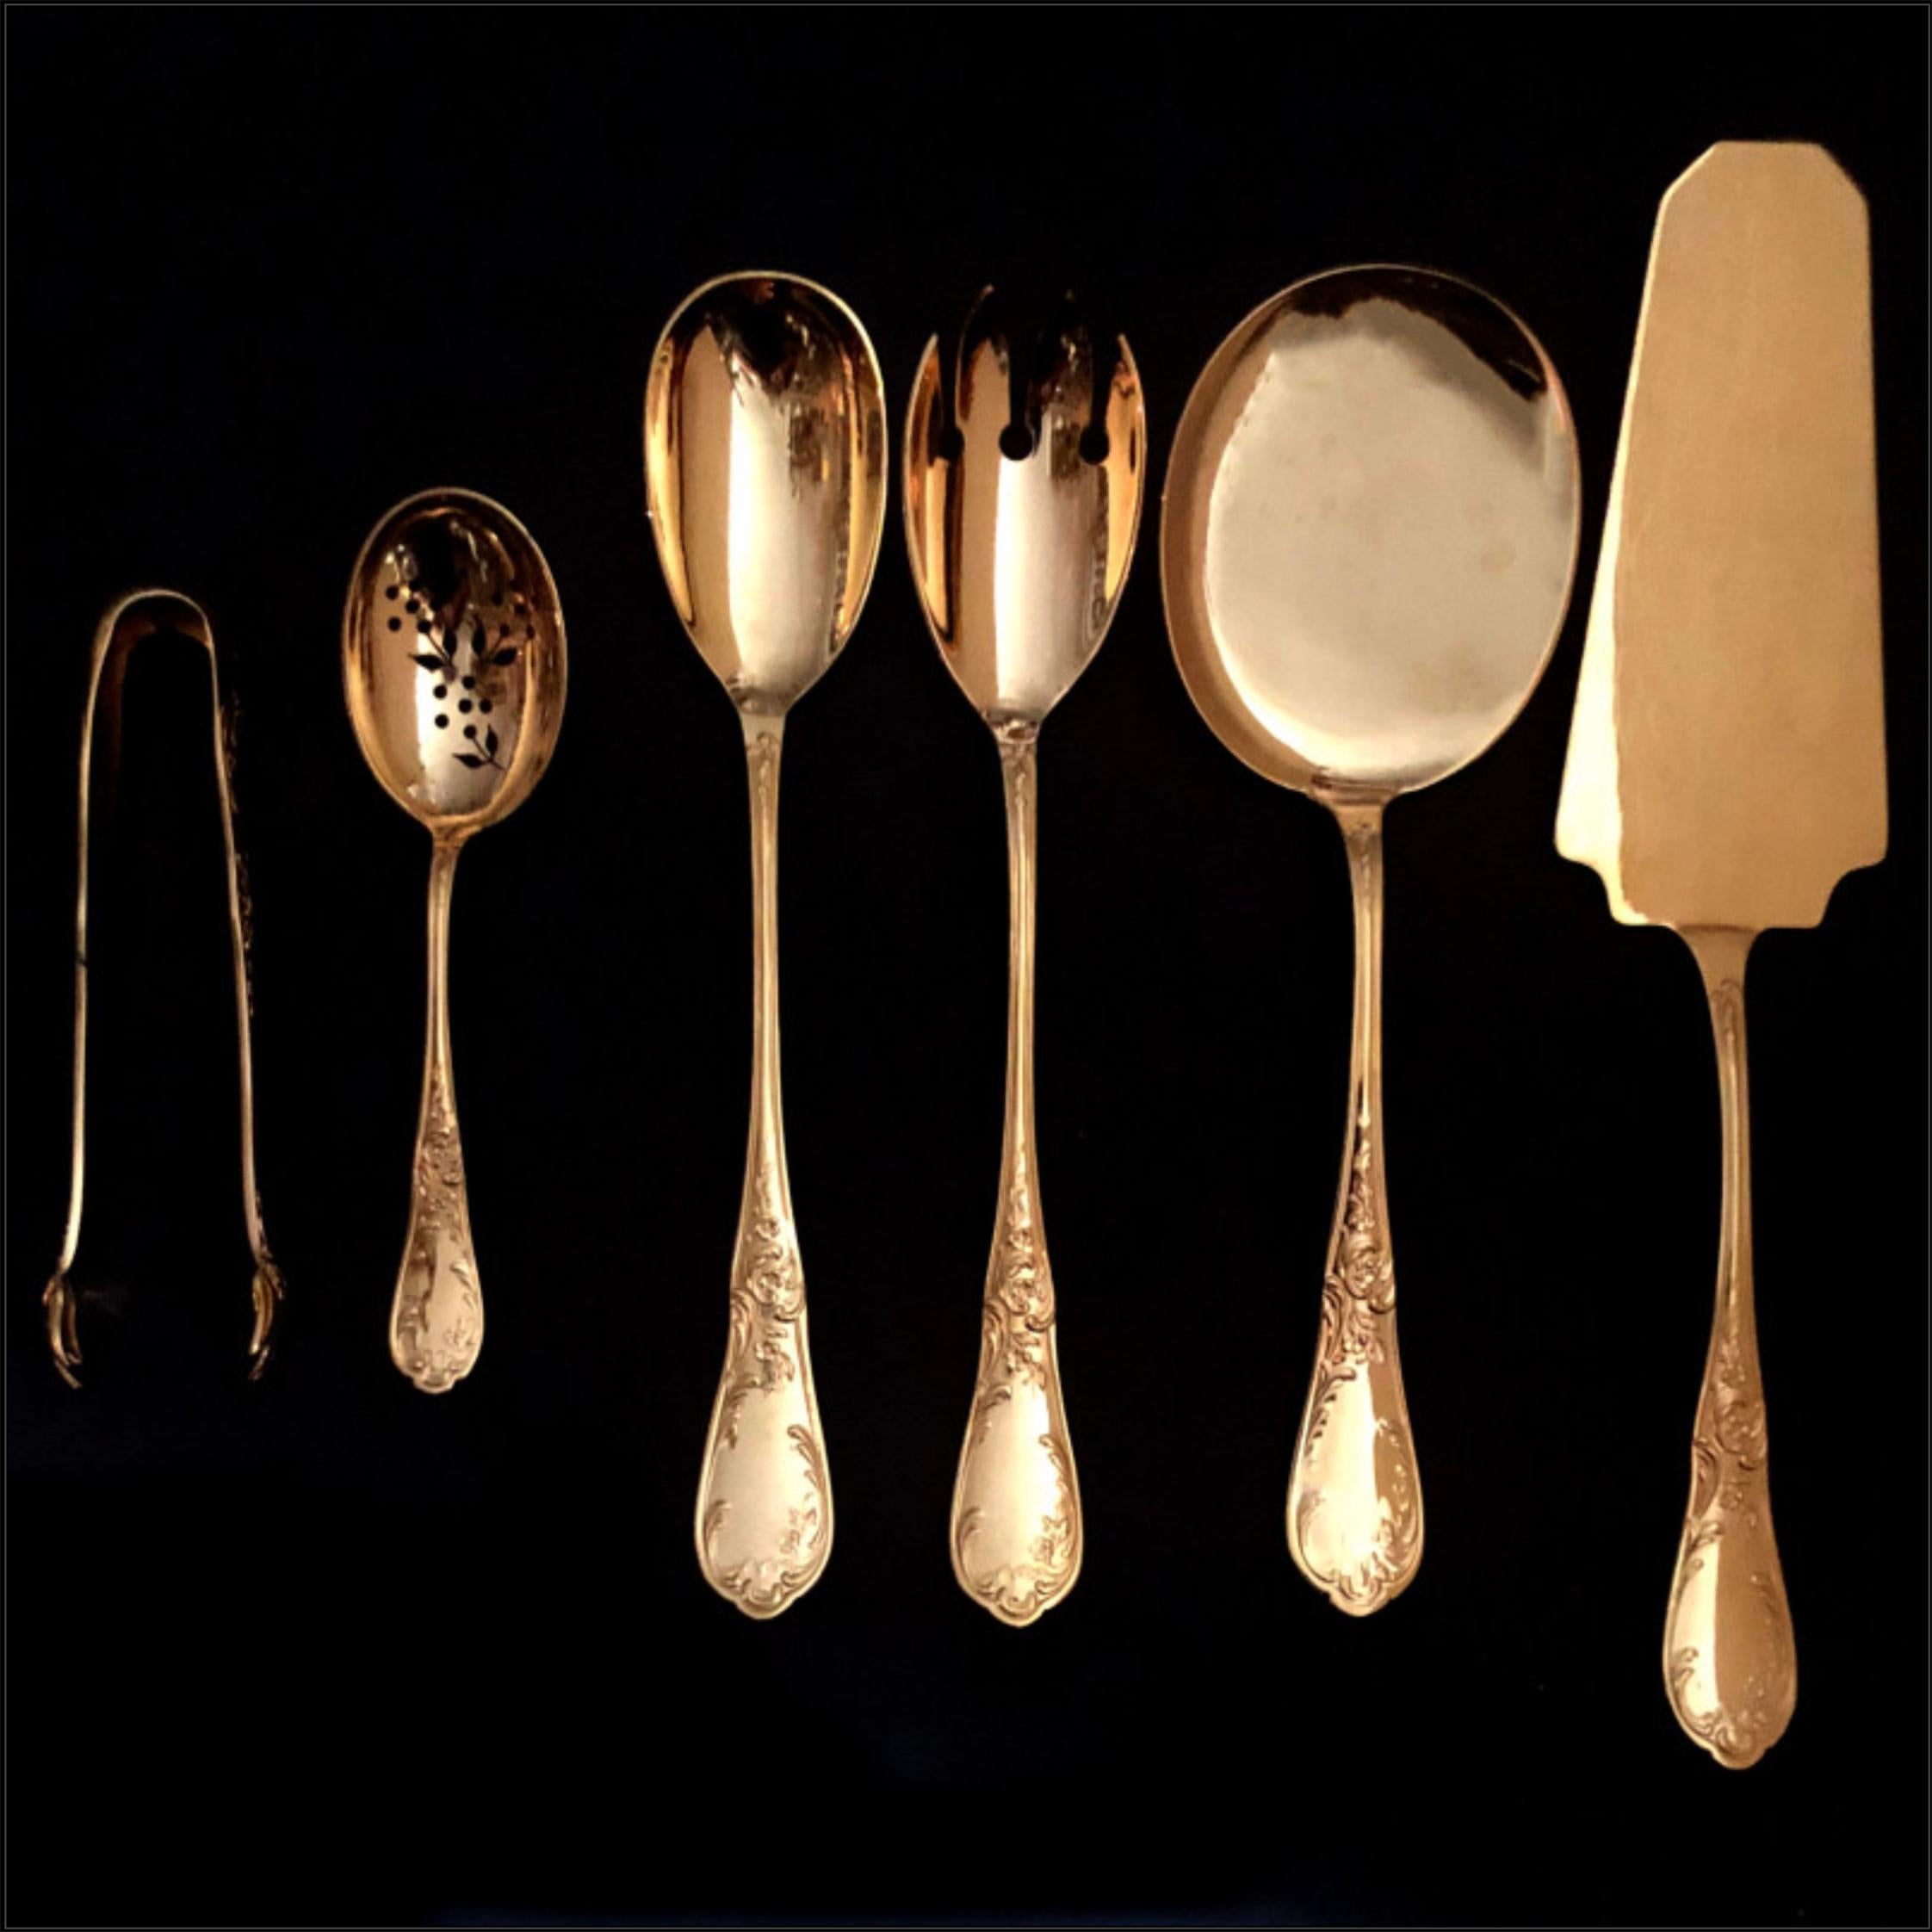 French Gilded Flatware Called 